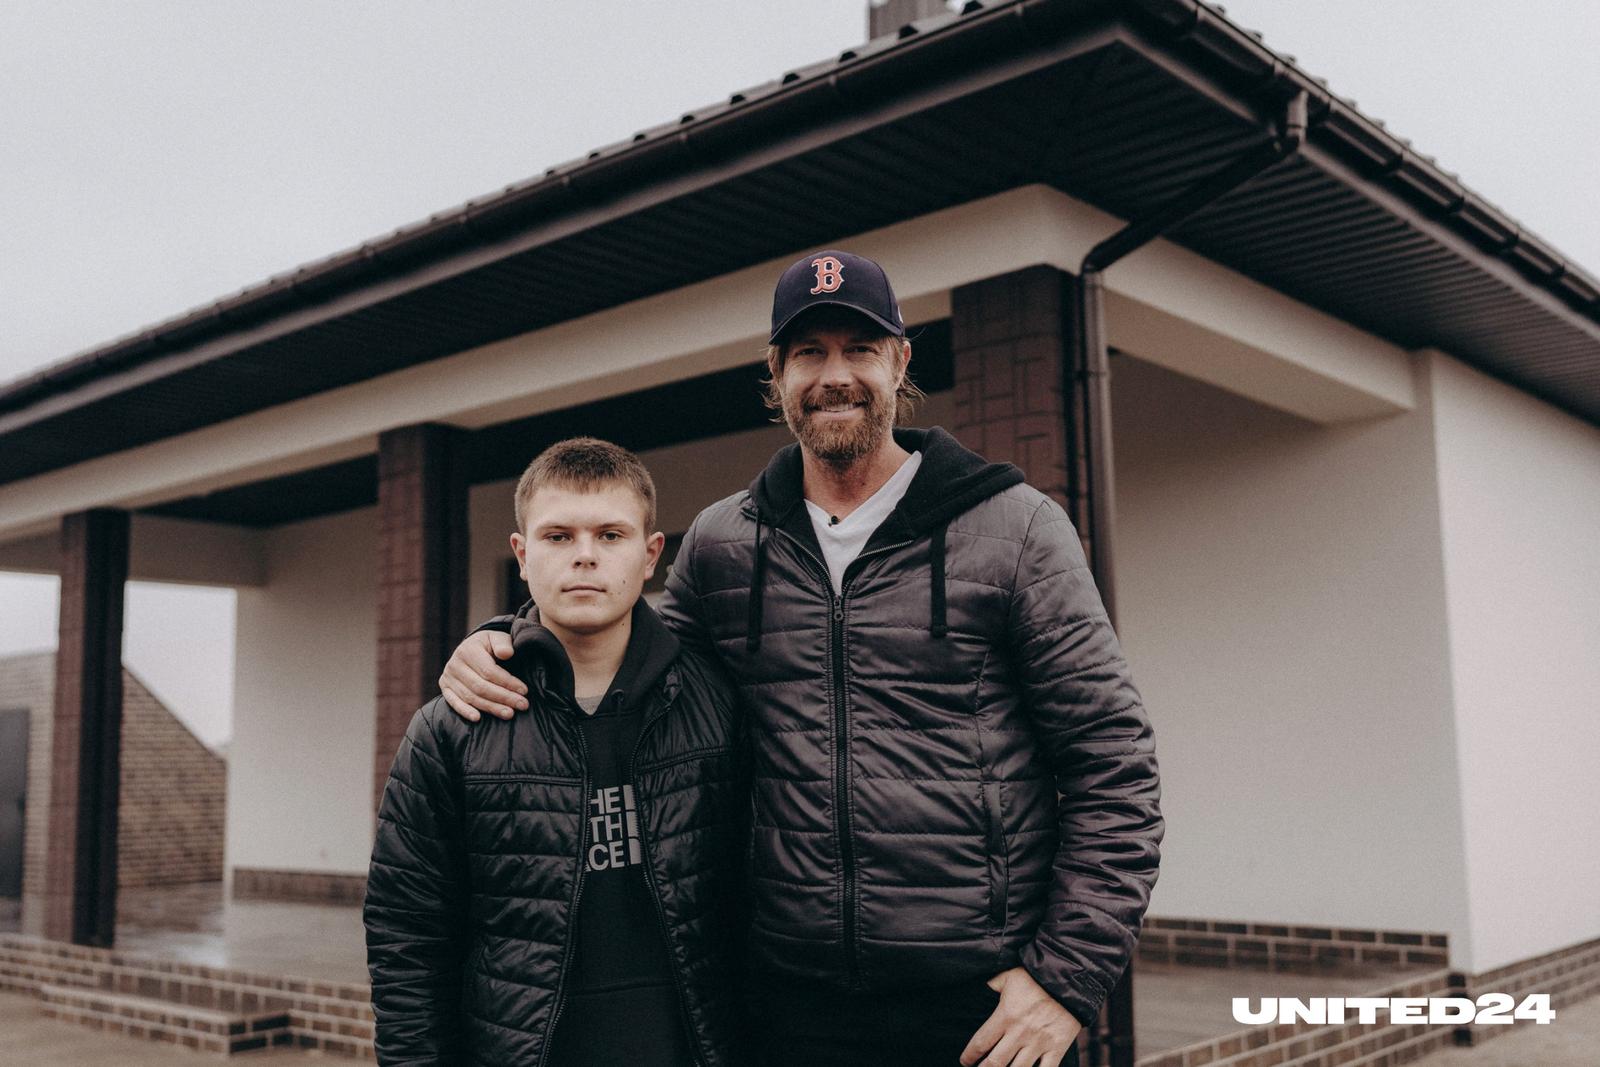 UNITED24 donor builds a new home for 15-year-old Sashko, hero of the Imagine Dragons music video